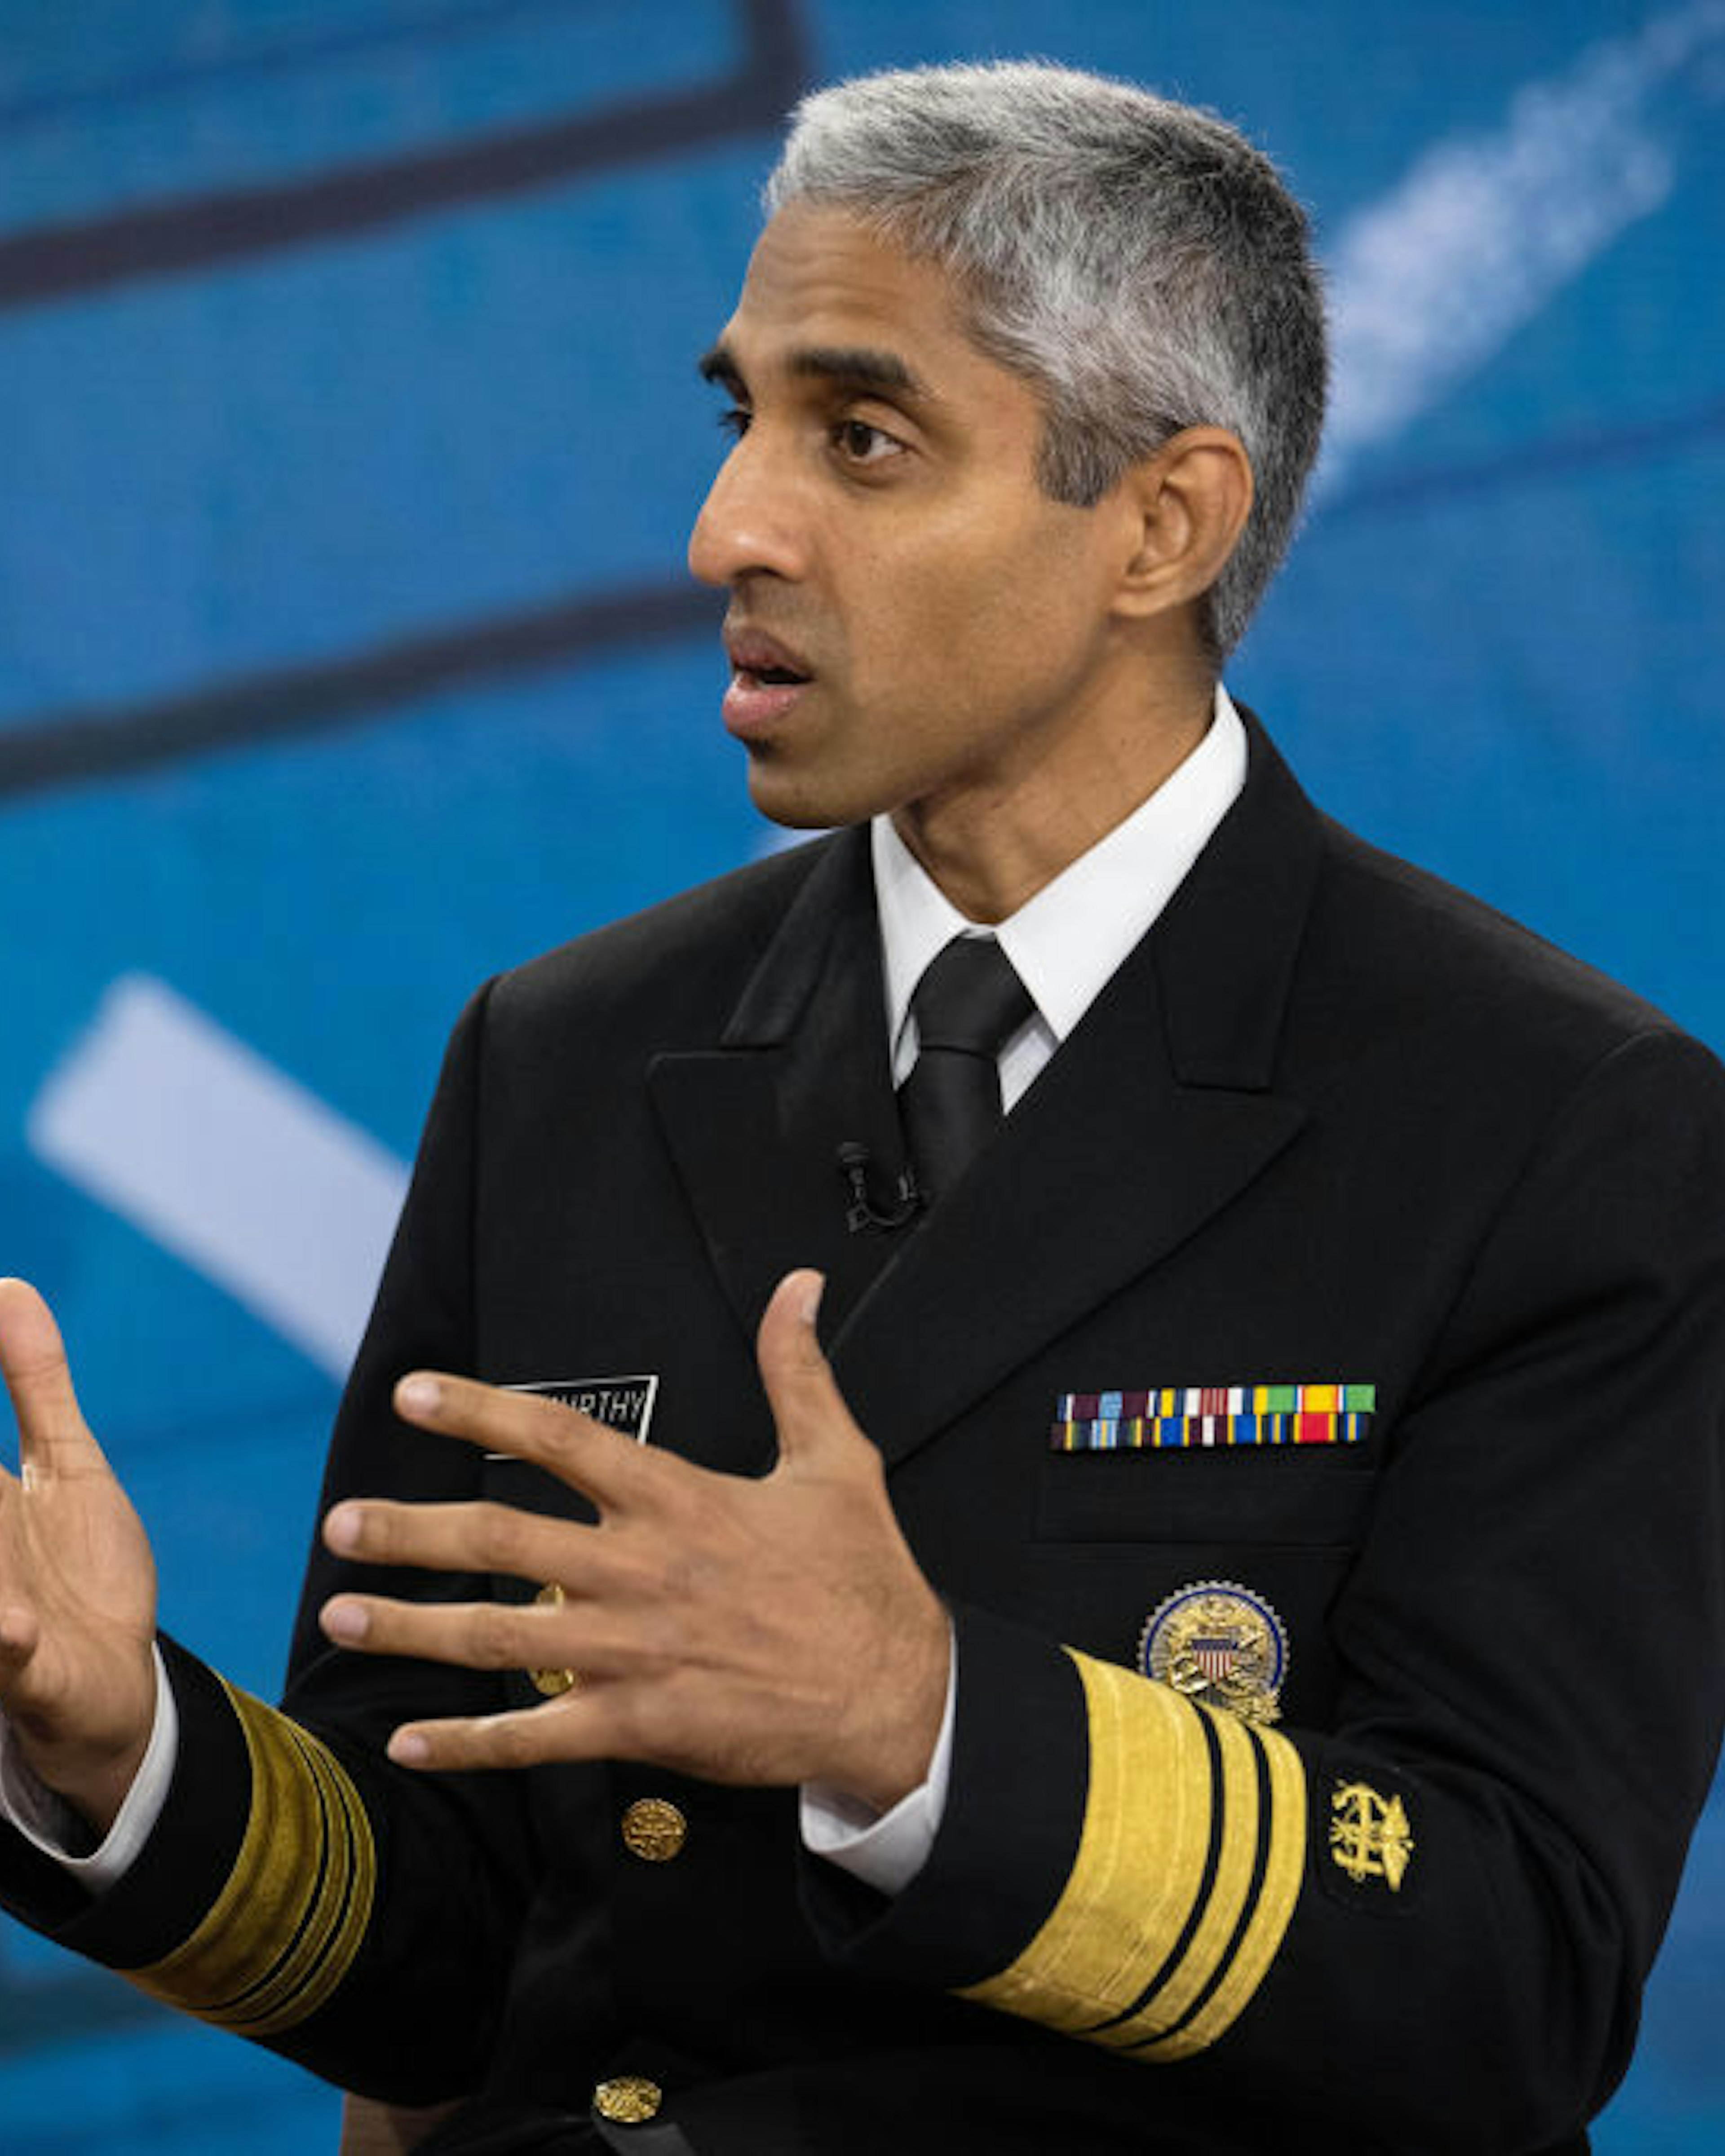 TODAY -- Pictured: U.S. Surgeon General Dr. Vivek Murthy on Tuesday, October 10, 2023 -- (Photo by: Nathan Congleton/NBC via Getty Images)